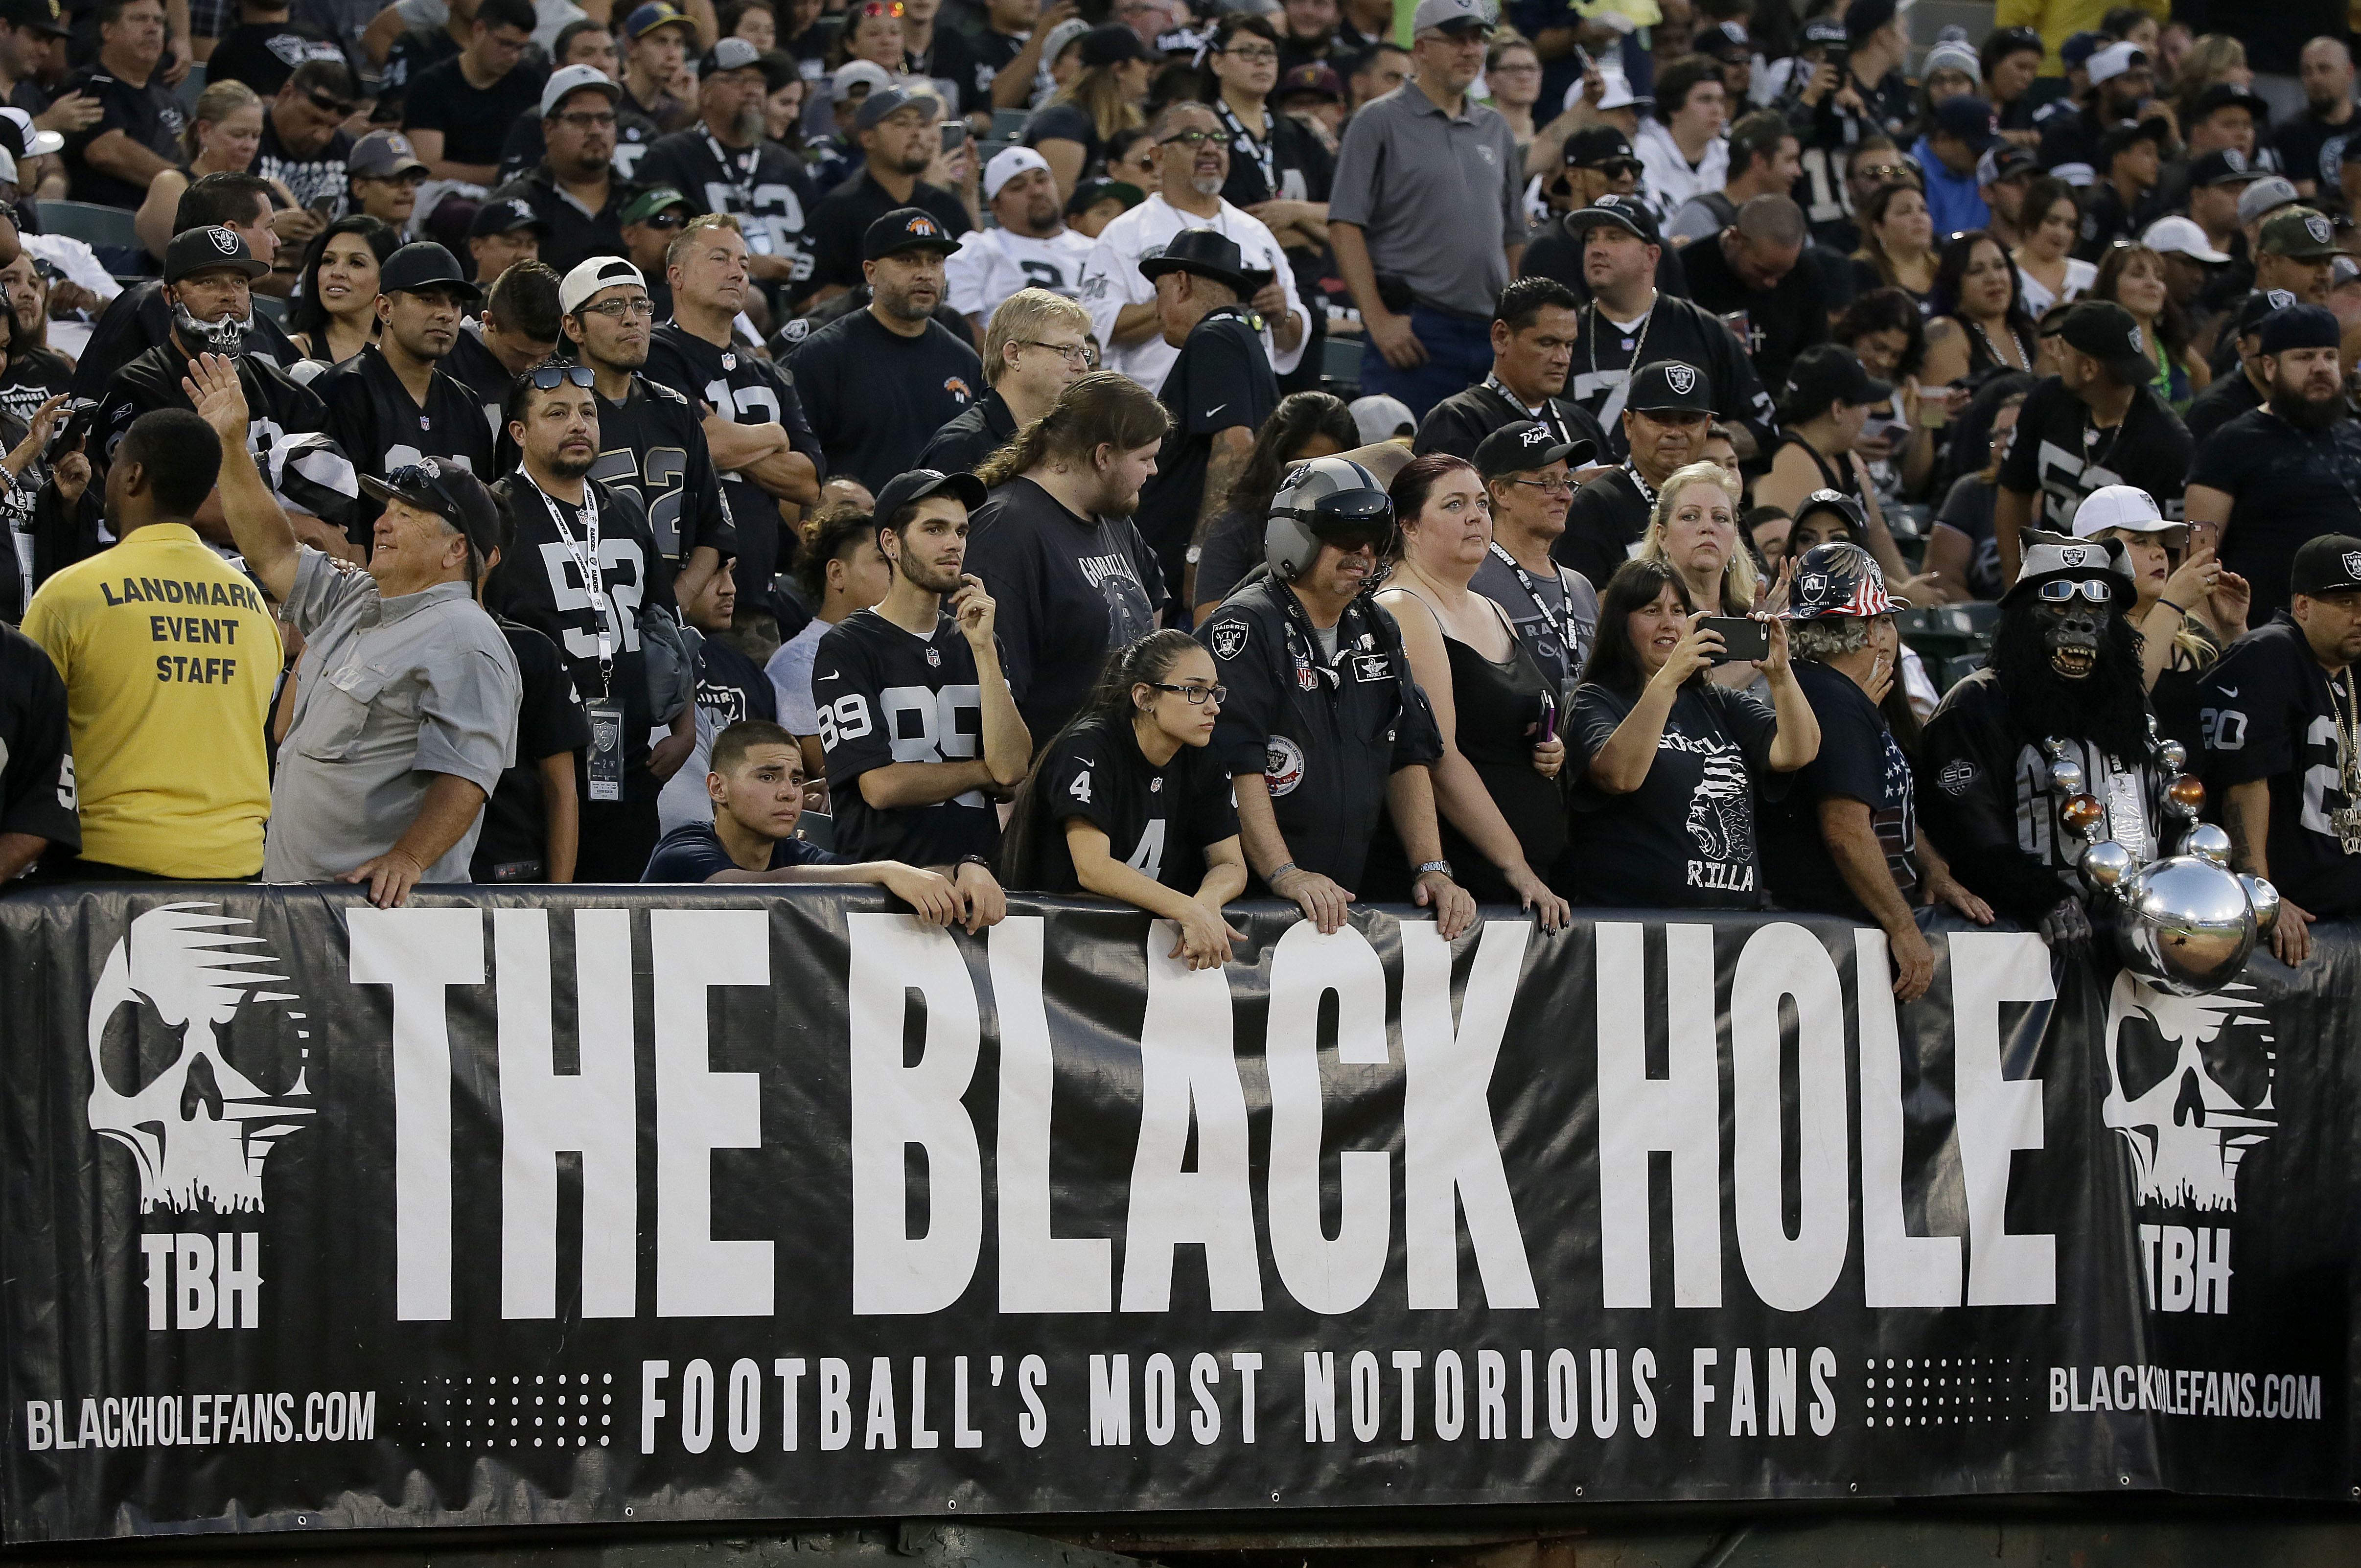 NFL At 100: Raiders' slow exit from Oakland painful for fans